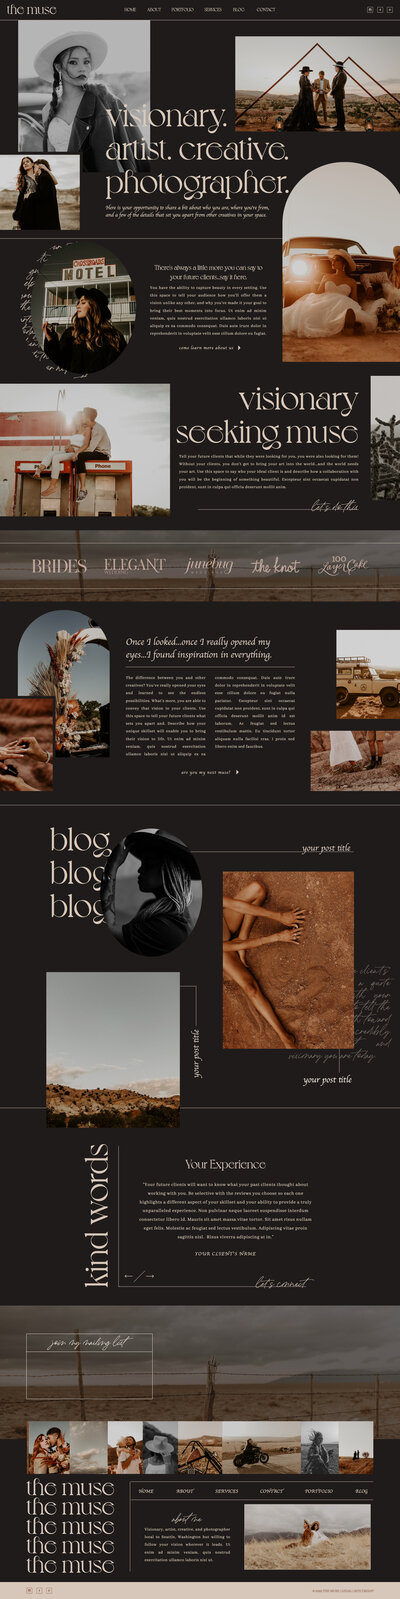 the muse website in a dark color palette